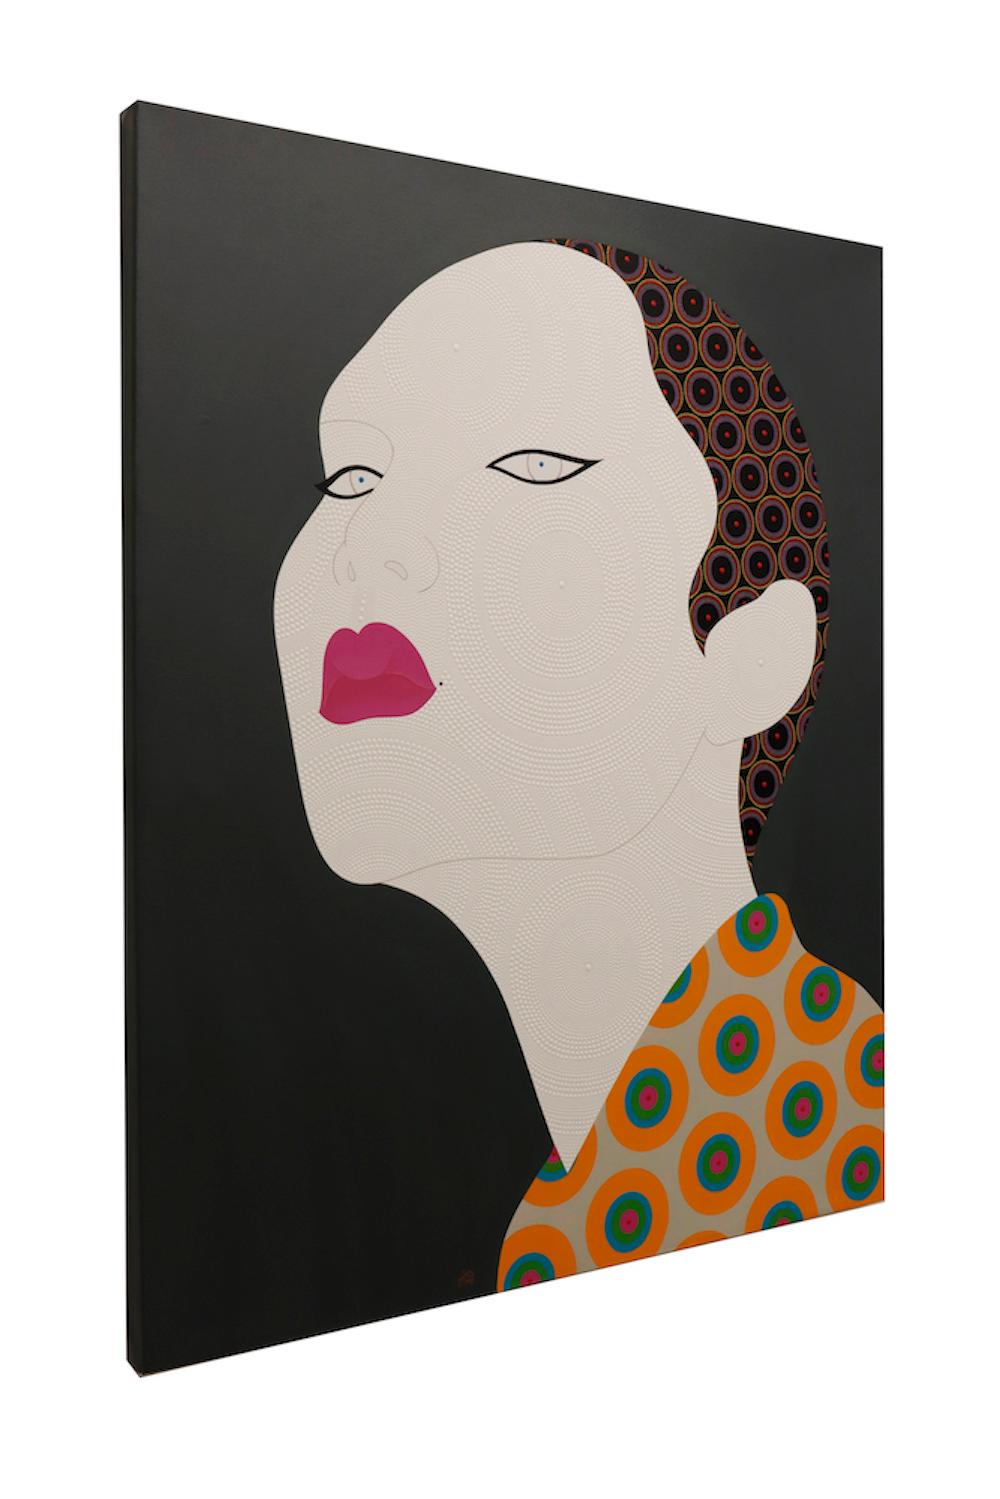 Textural free hand dot painting of woman portrait in pop style with orange bold lips, titled “Jytte